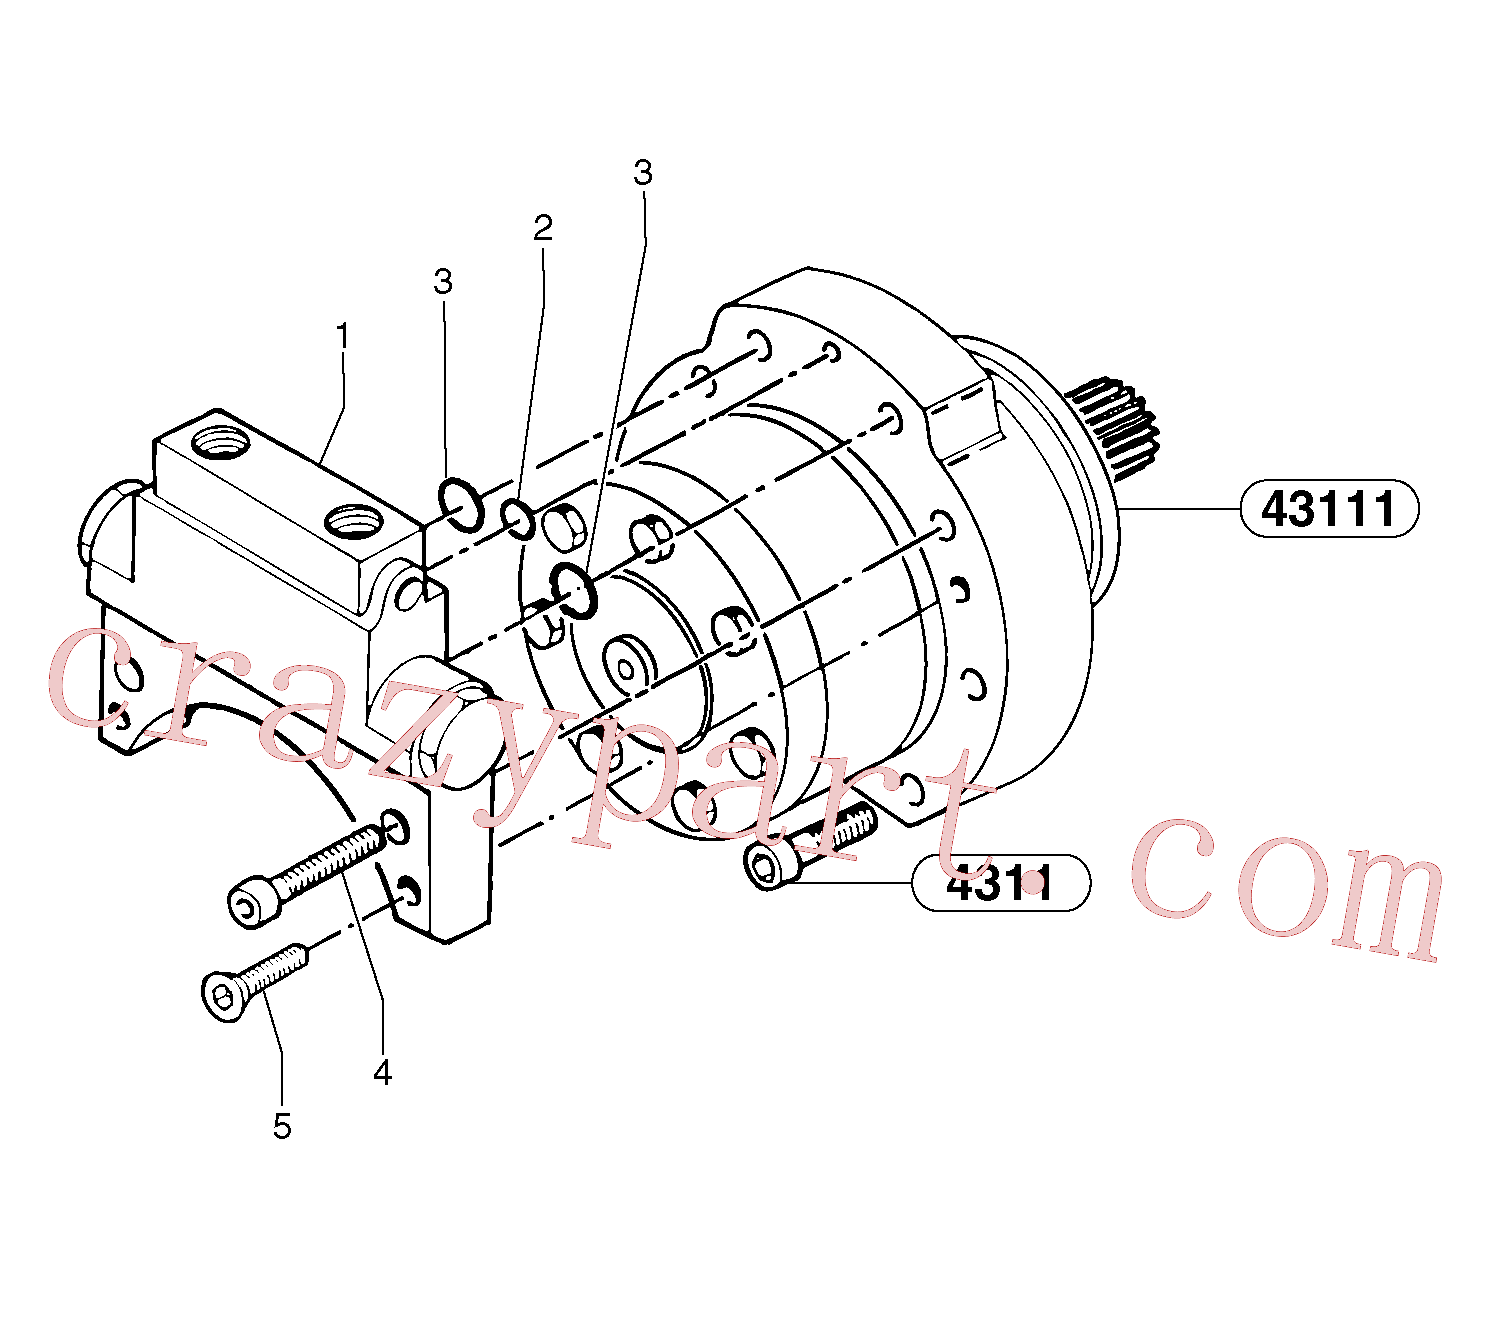 PJ7415939 for Volvo Balancing valve ( travelling )(43113X1 assembly)